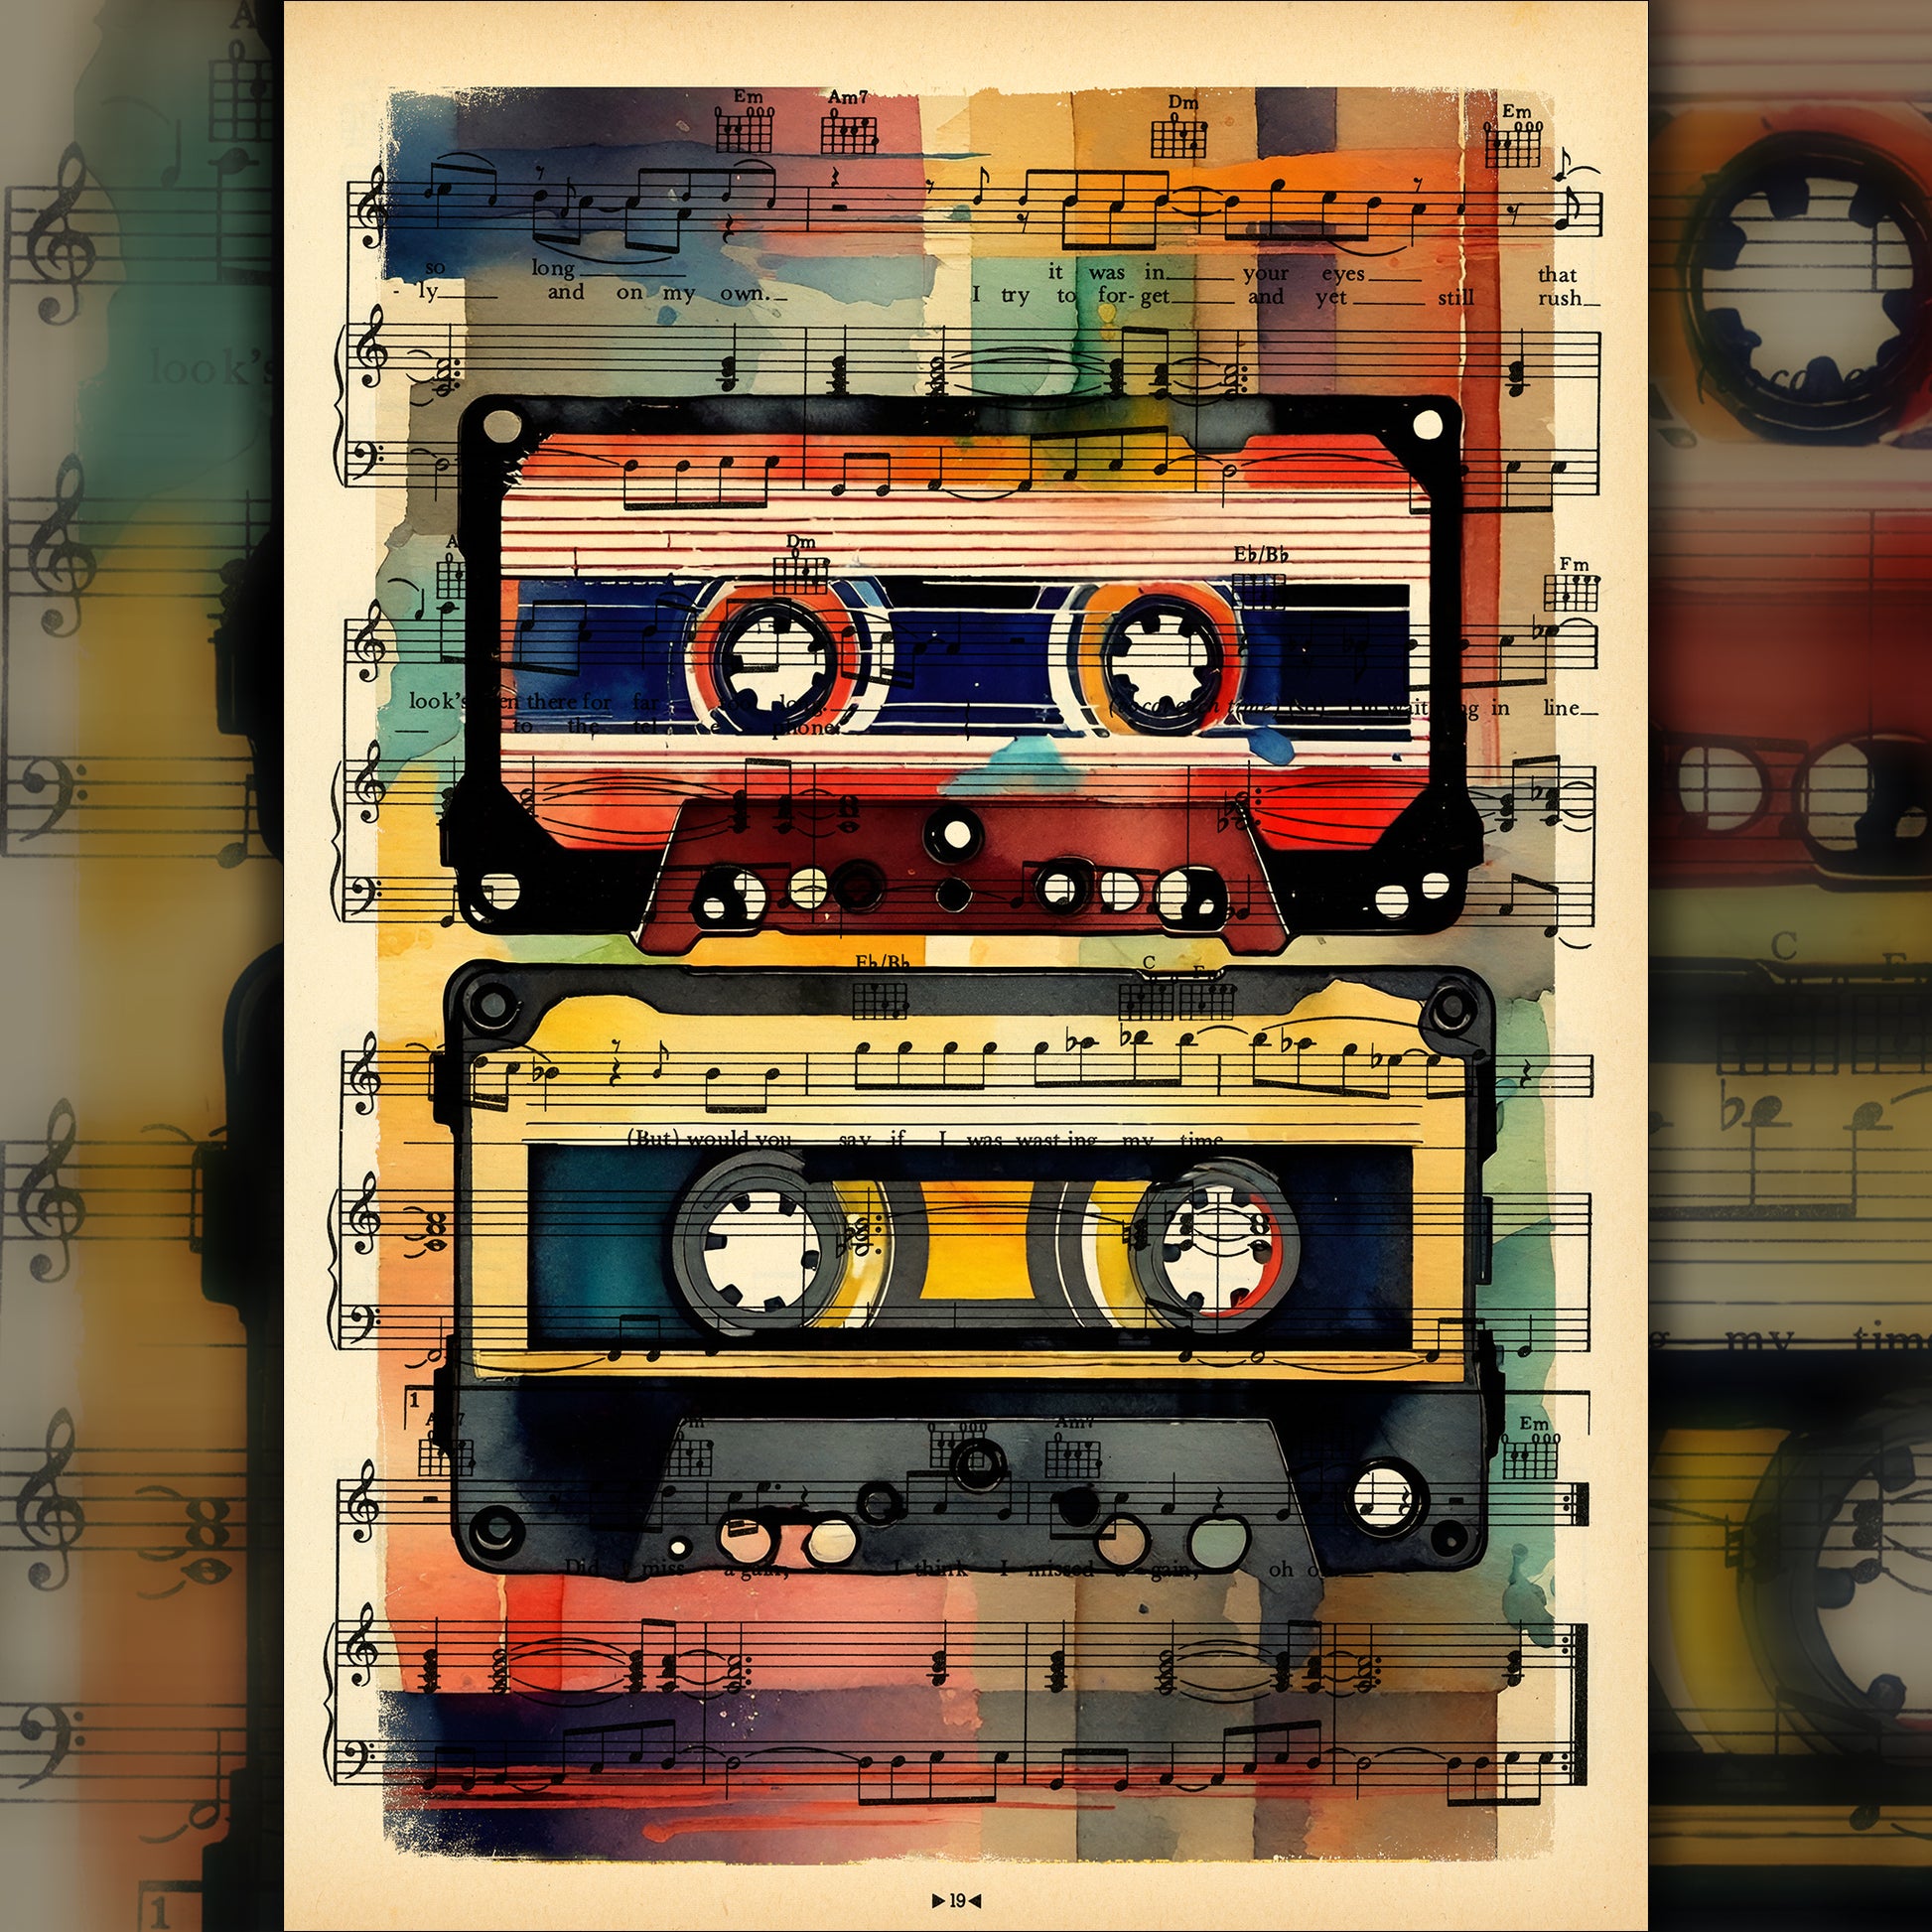 Experience the nostalgia of cassette tapes and synthesizers with HiFi Retro Audio MixTape.